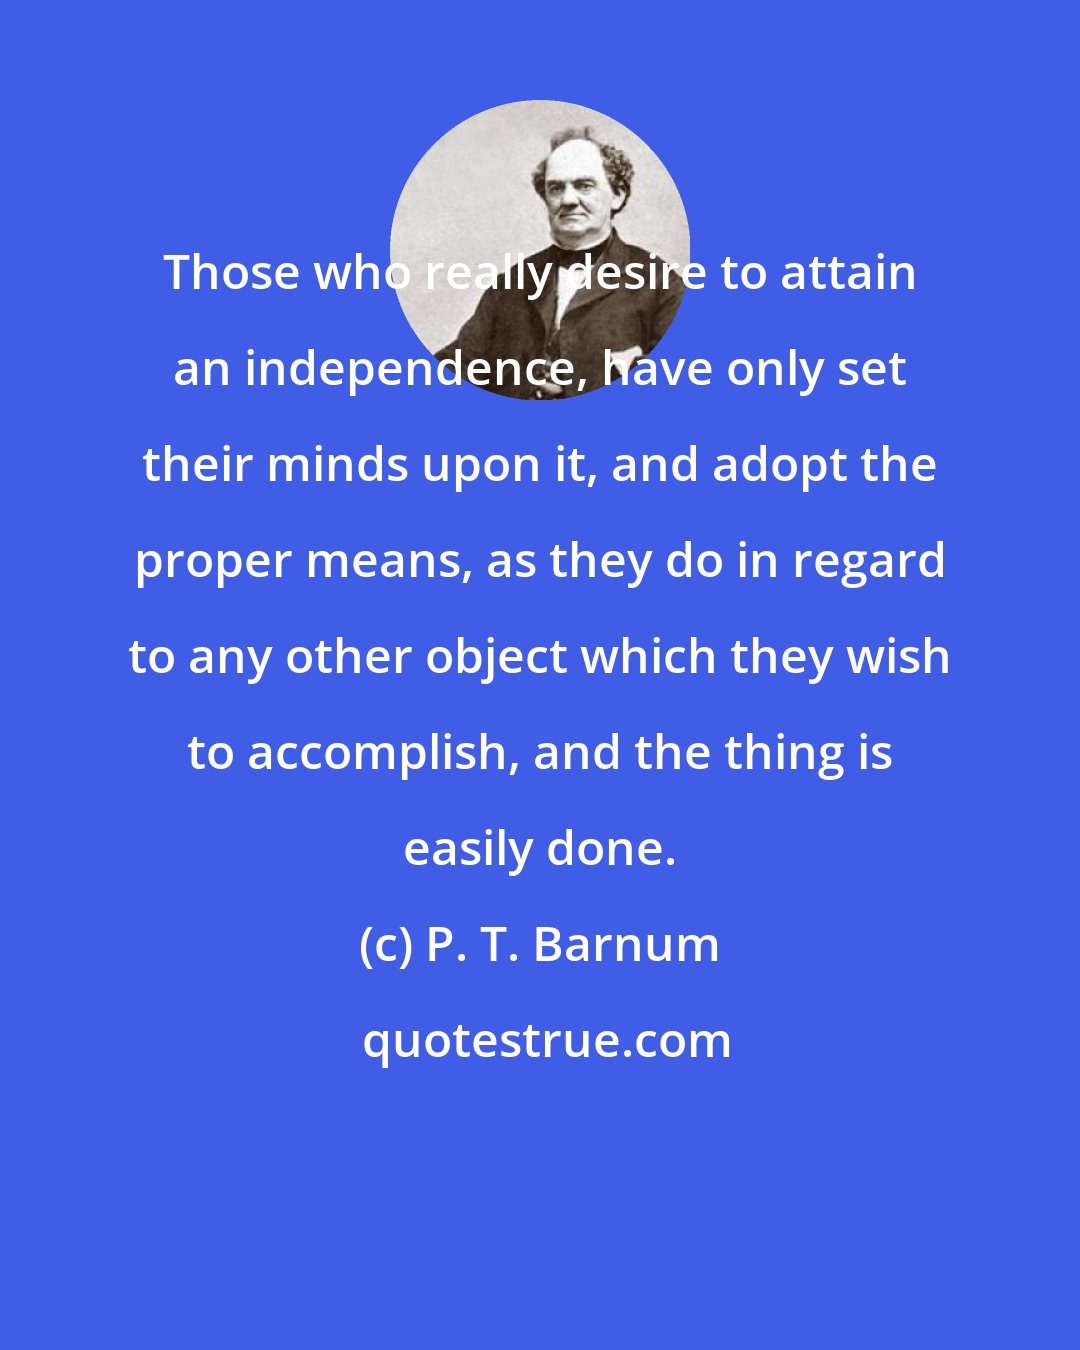 P. T. Barnum: Those who really desire to attain an independence, have only set their minds upon it, and adopt the proper means, as they do in regard to any other object which they wish to accomplish, and the thing is easily done.